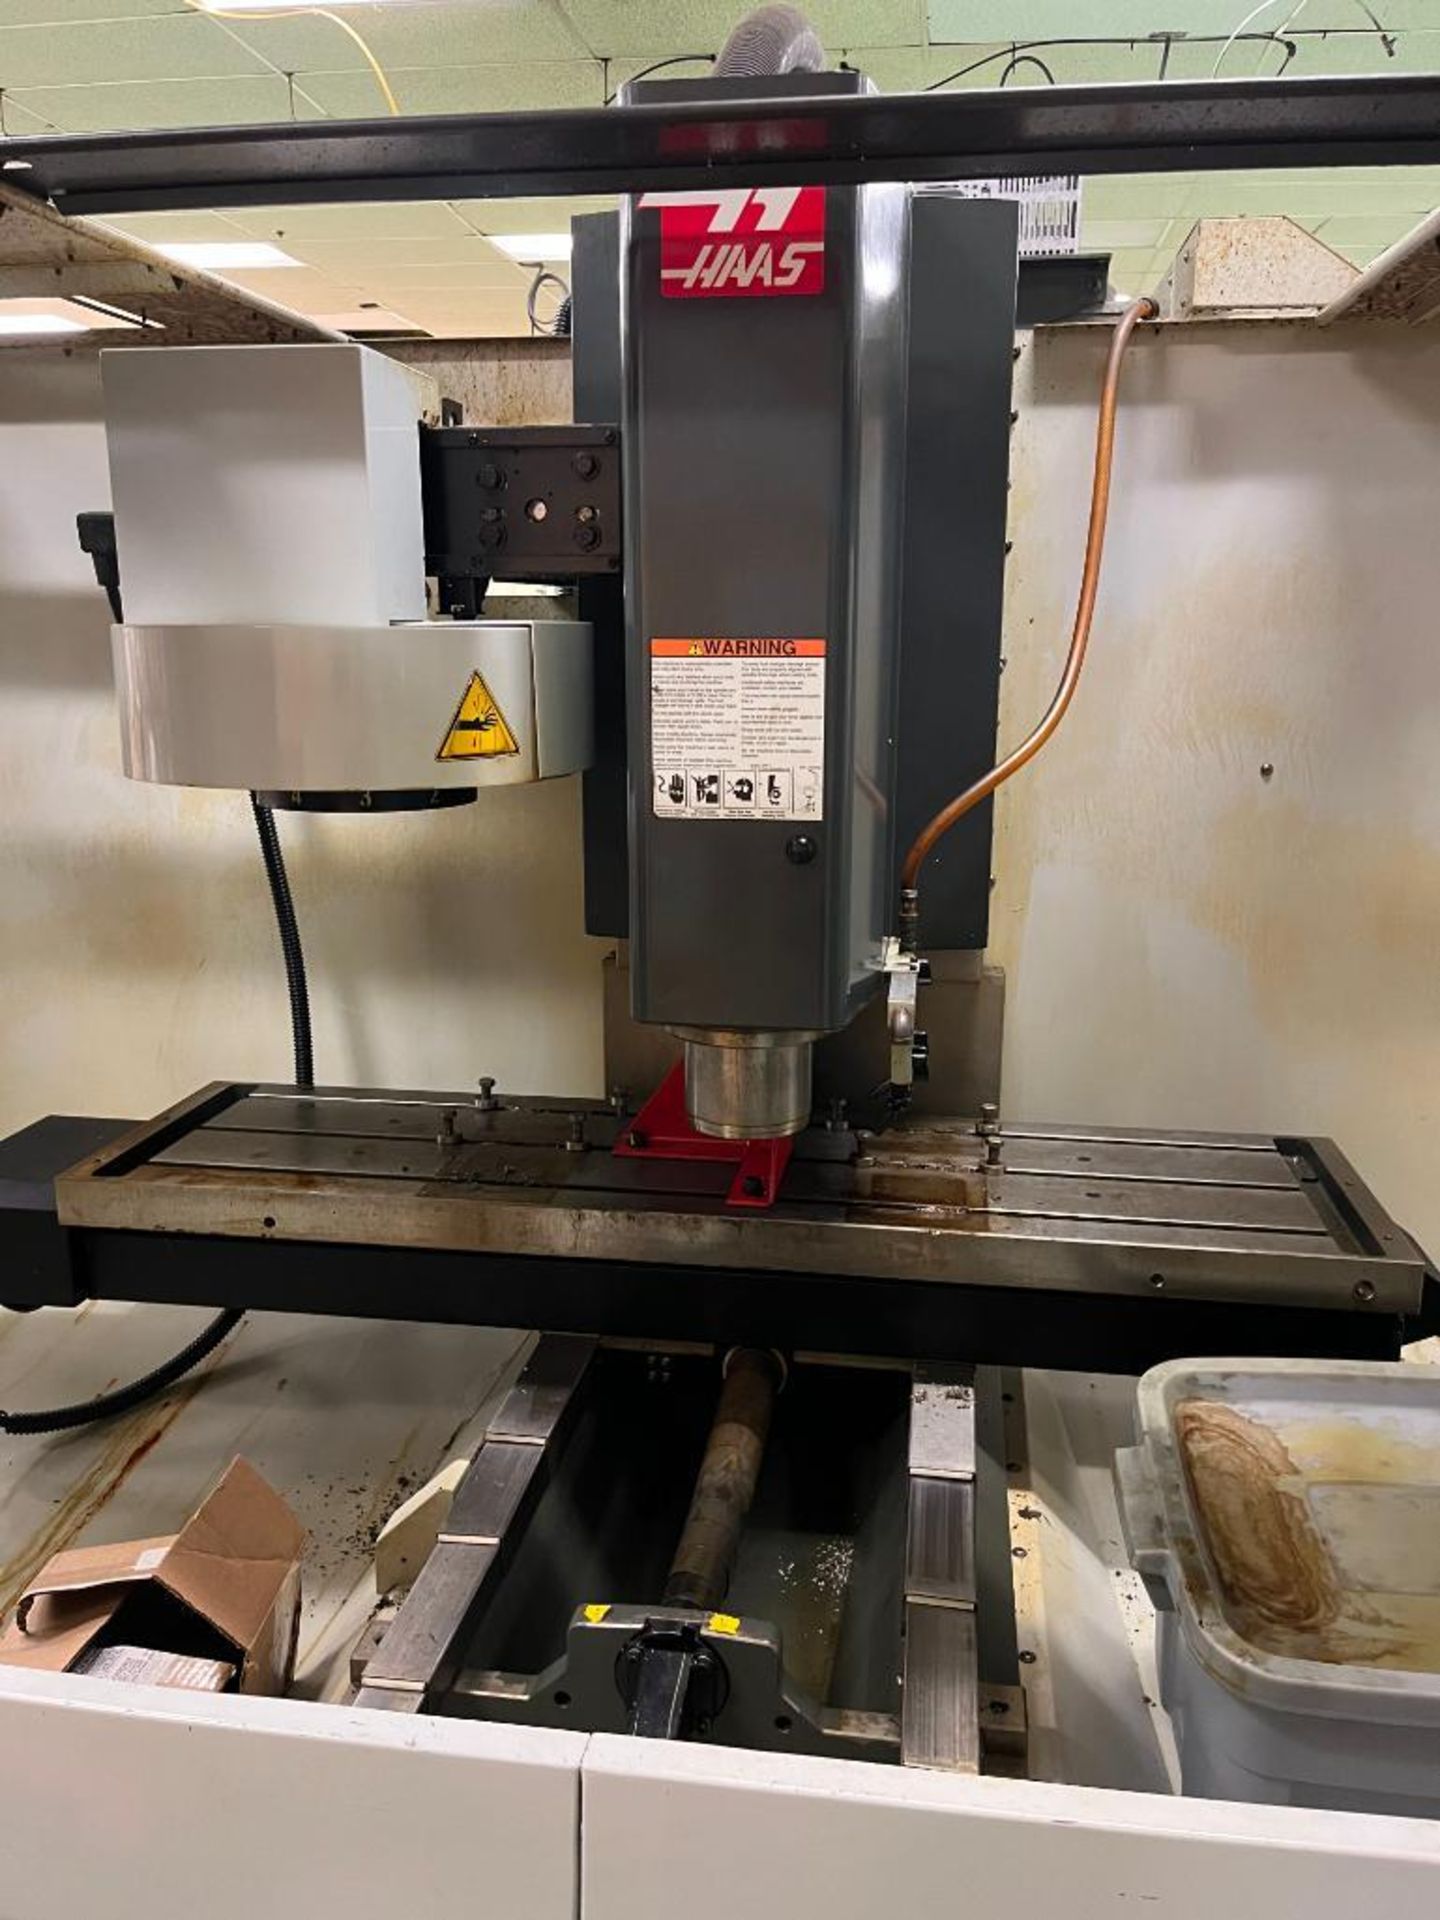 2011 Haas CNC Mill, Model TM-3P, S/N 1089539, 3-Phase, 240 Volt, 57-3/4" X 14-1/2" Table, 6,000 RPM, - Image 5 of 14